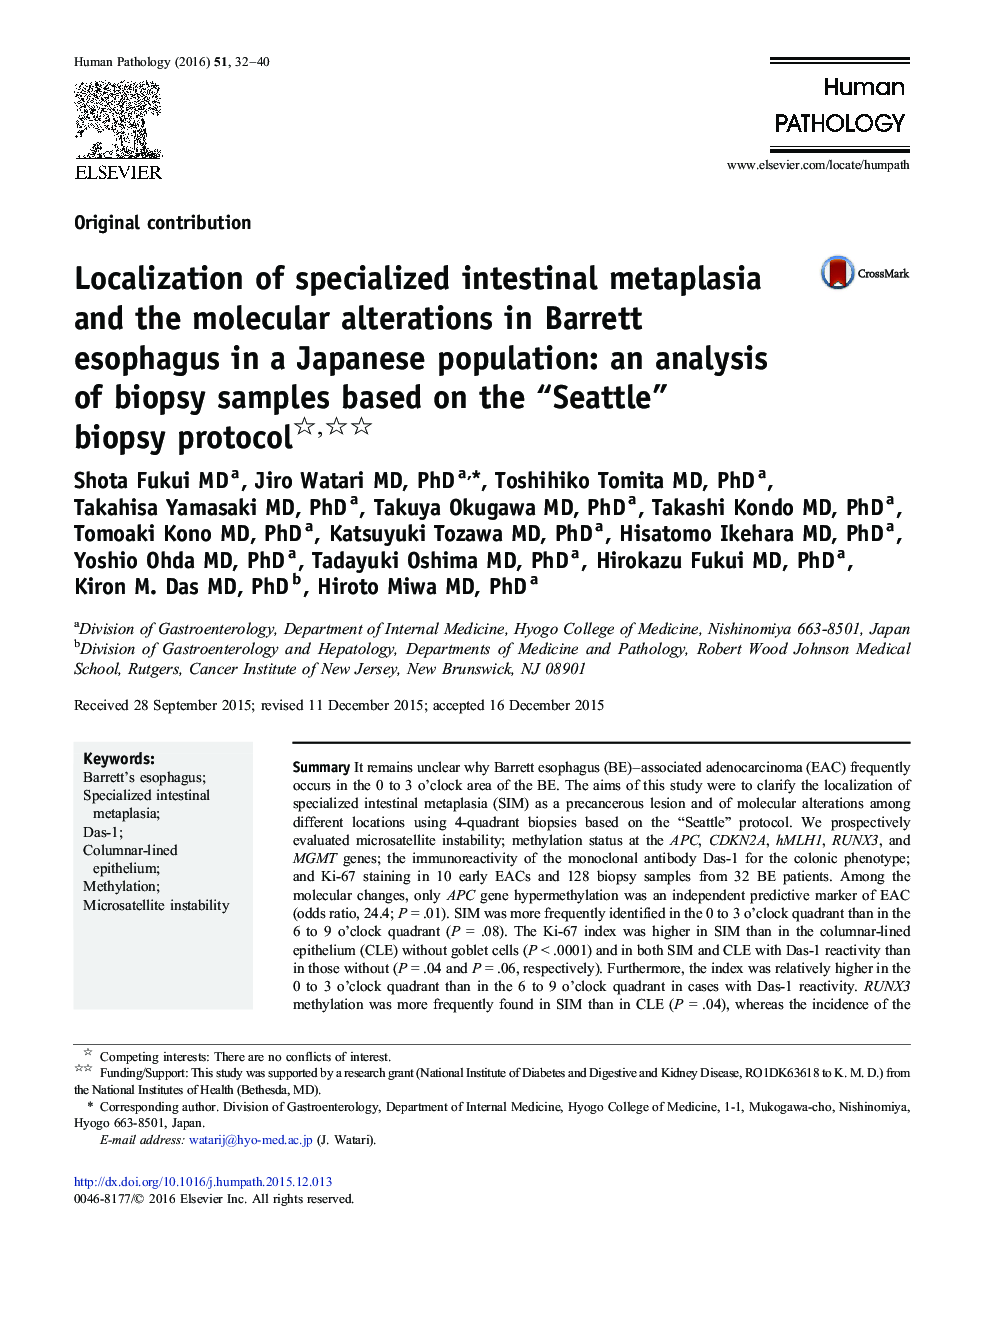 Localization of specialized intestinal metaplasia and the molecular alterations in Barrett esophagus in a Japanese population: an analysis of biopsy samples based on the “Seattle” biopsy protocol 